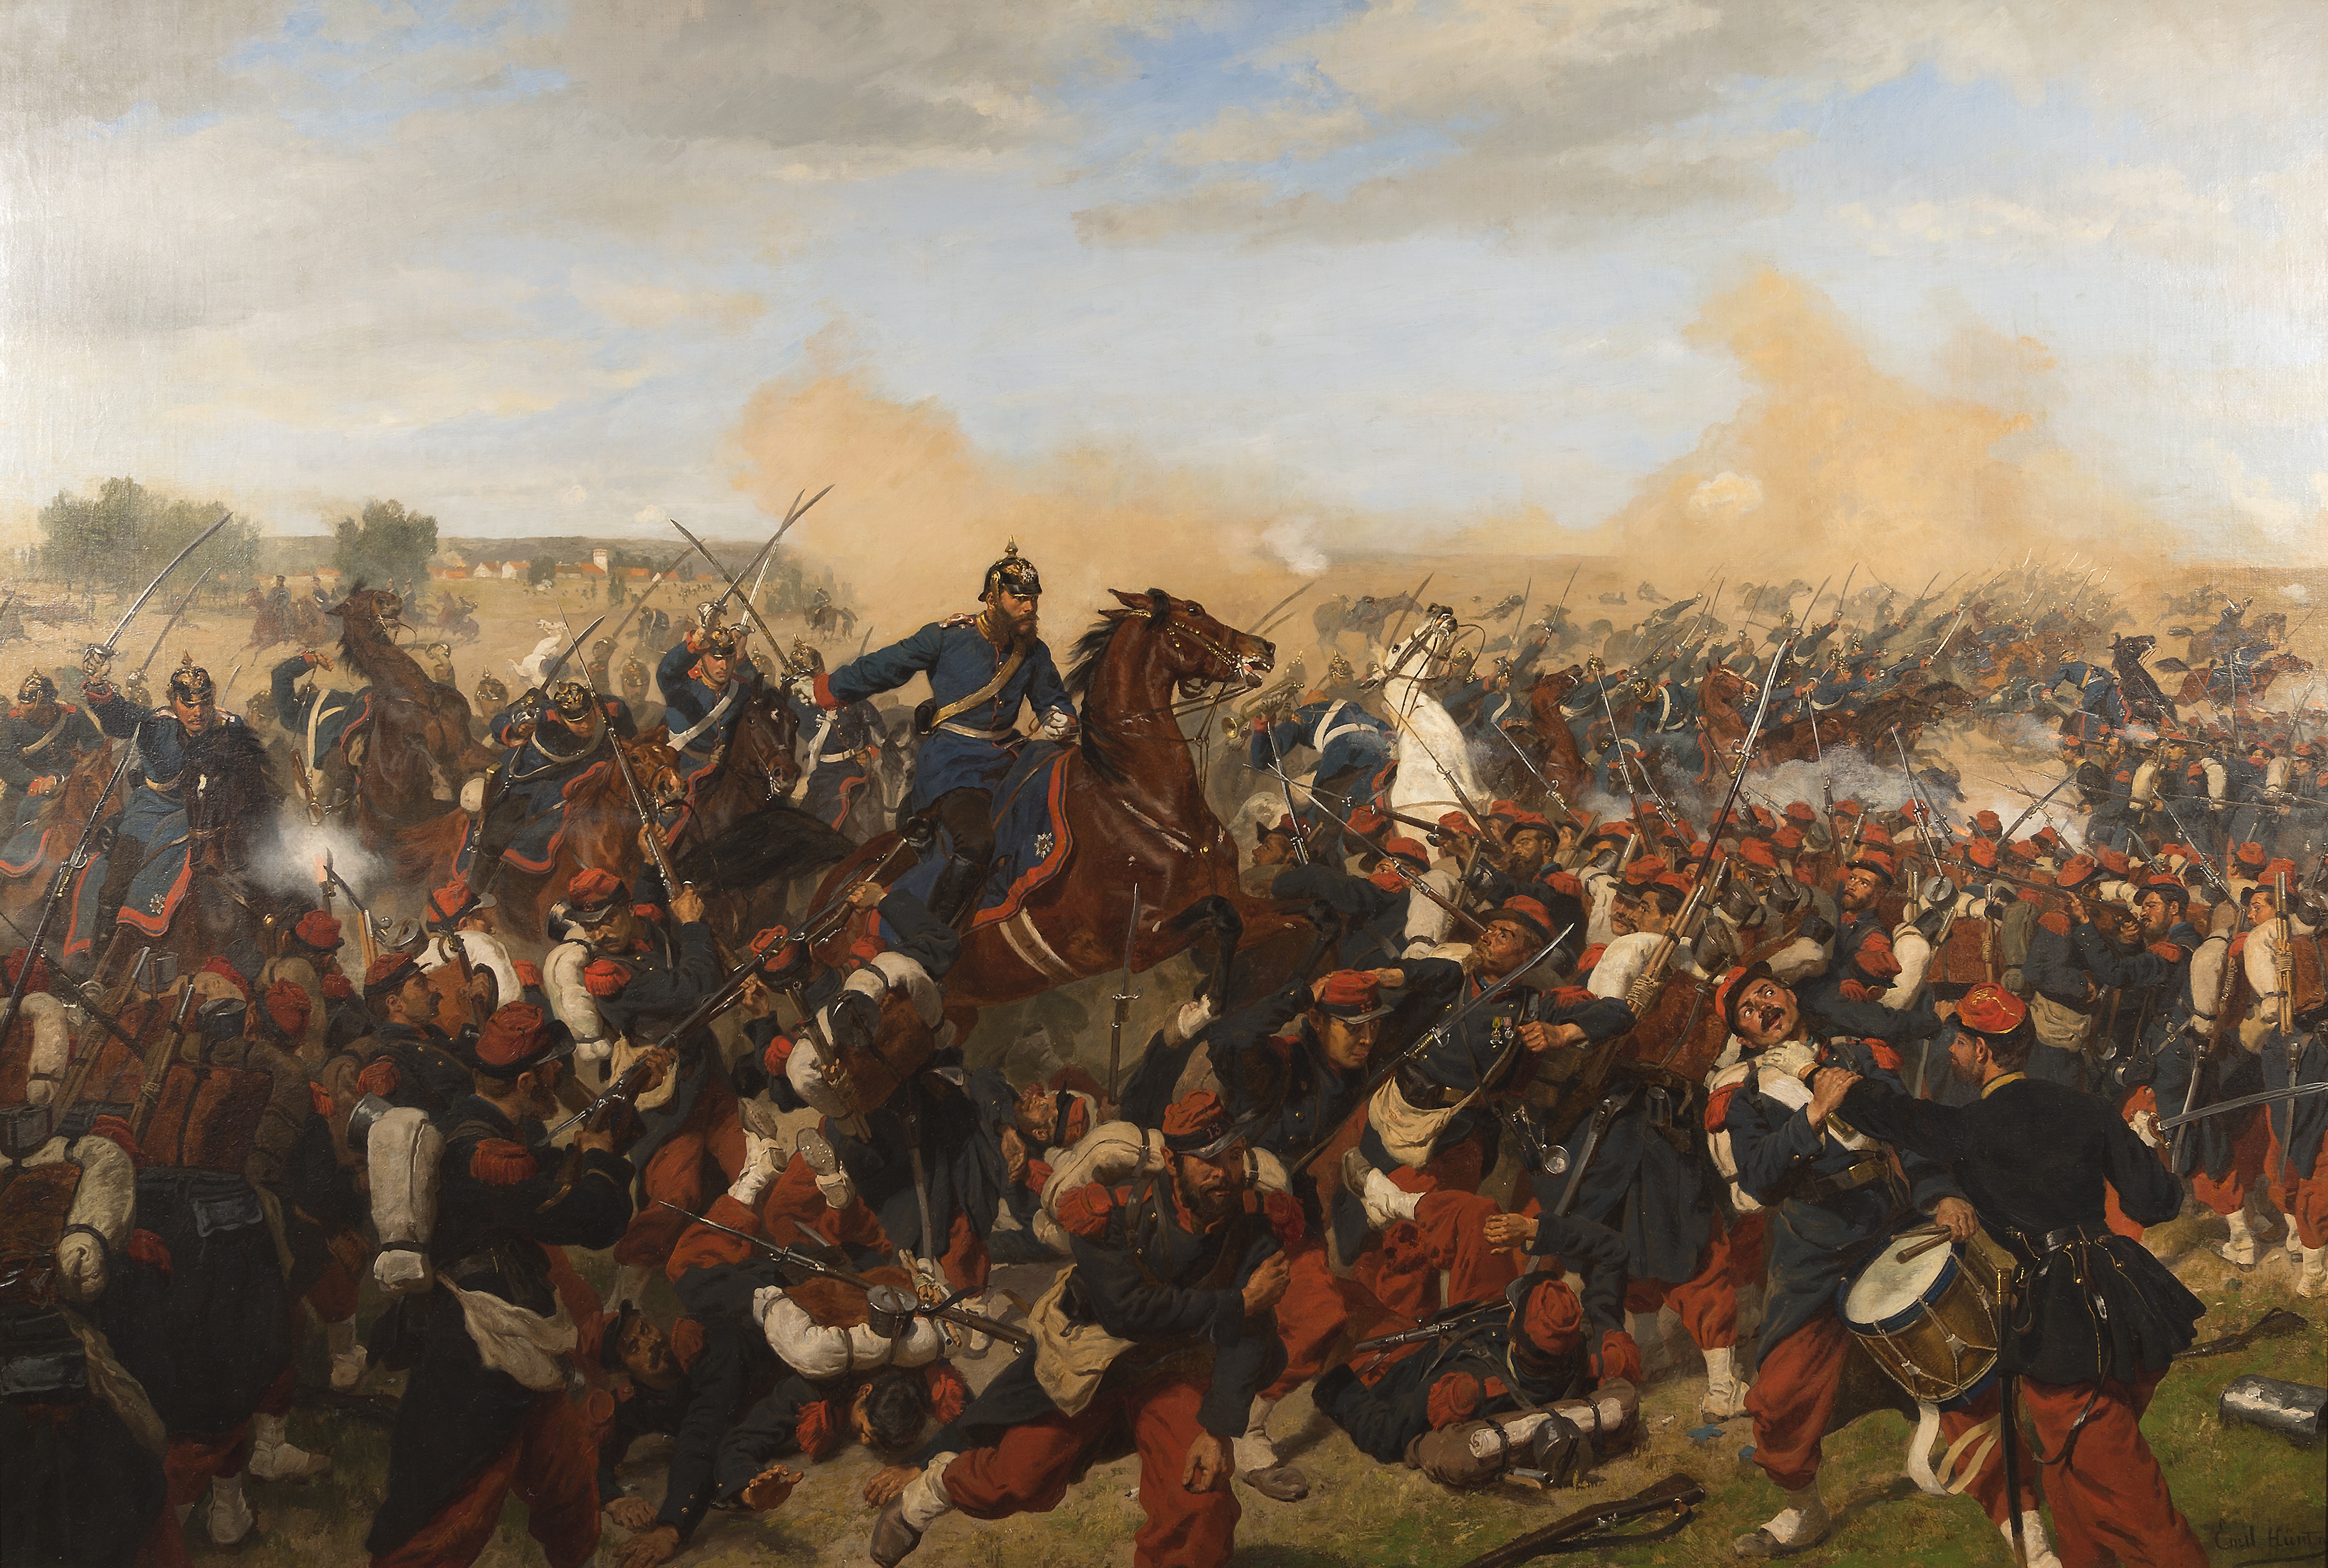 Historic History Horse Horse Riding Cavalry France Prussia Painting War Battle Soldier Army Artwork  4461x3005